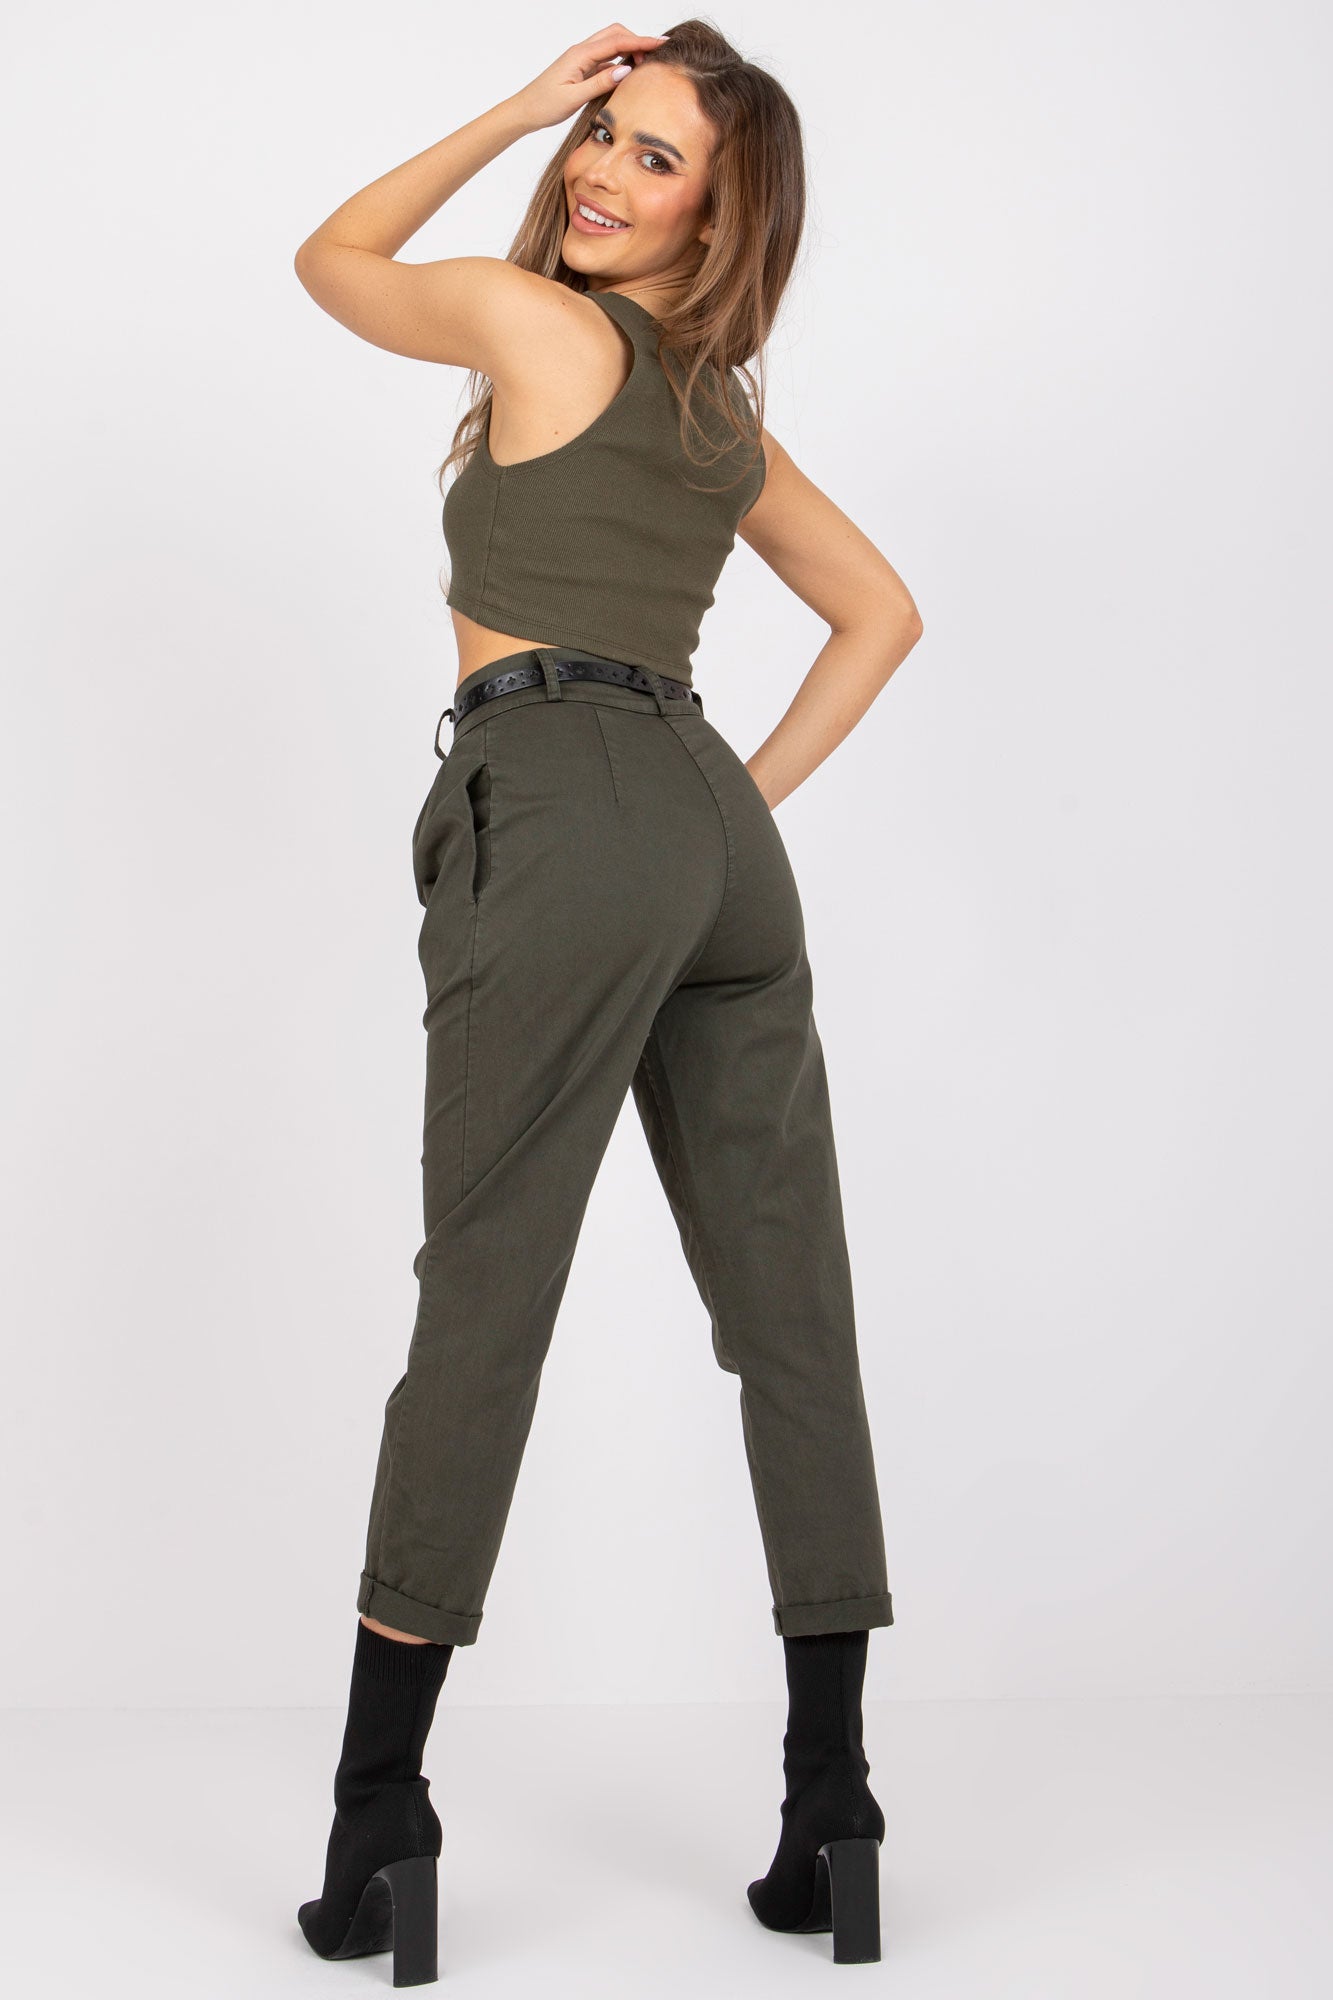 Discover timeless style with our Khaki Pleated Trousers with Belt. These trousers offer a classic pleated design and include a coordinating belt for a personalized fit. With trendy turned-up cuffs, they blend classic and contemporary fashion seamlessly. Upgrade your wardrobe with this versatile choice today.